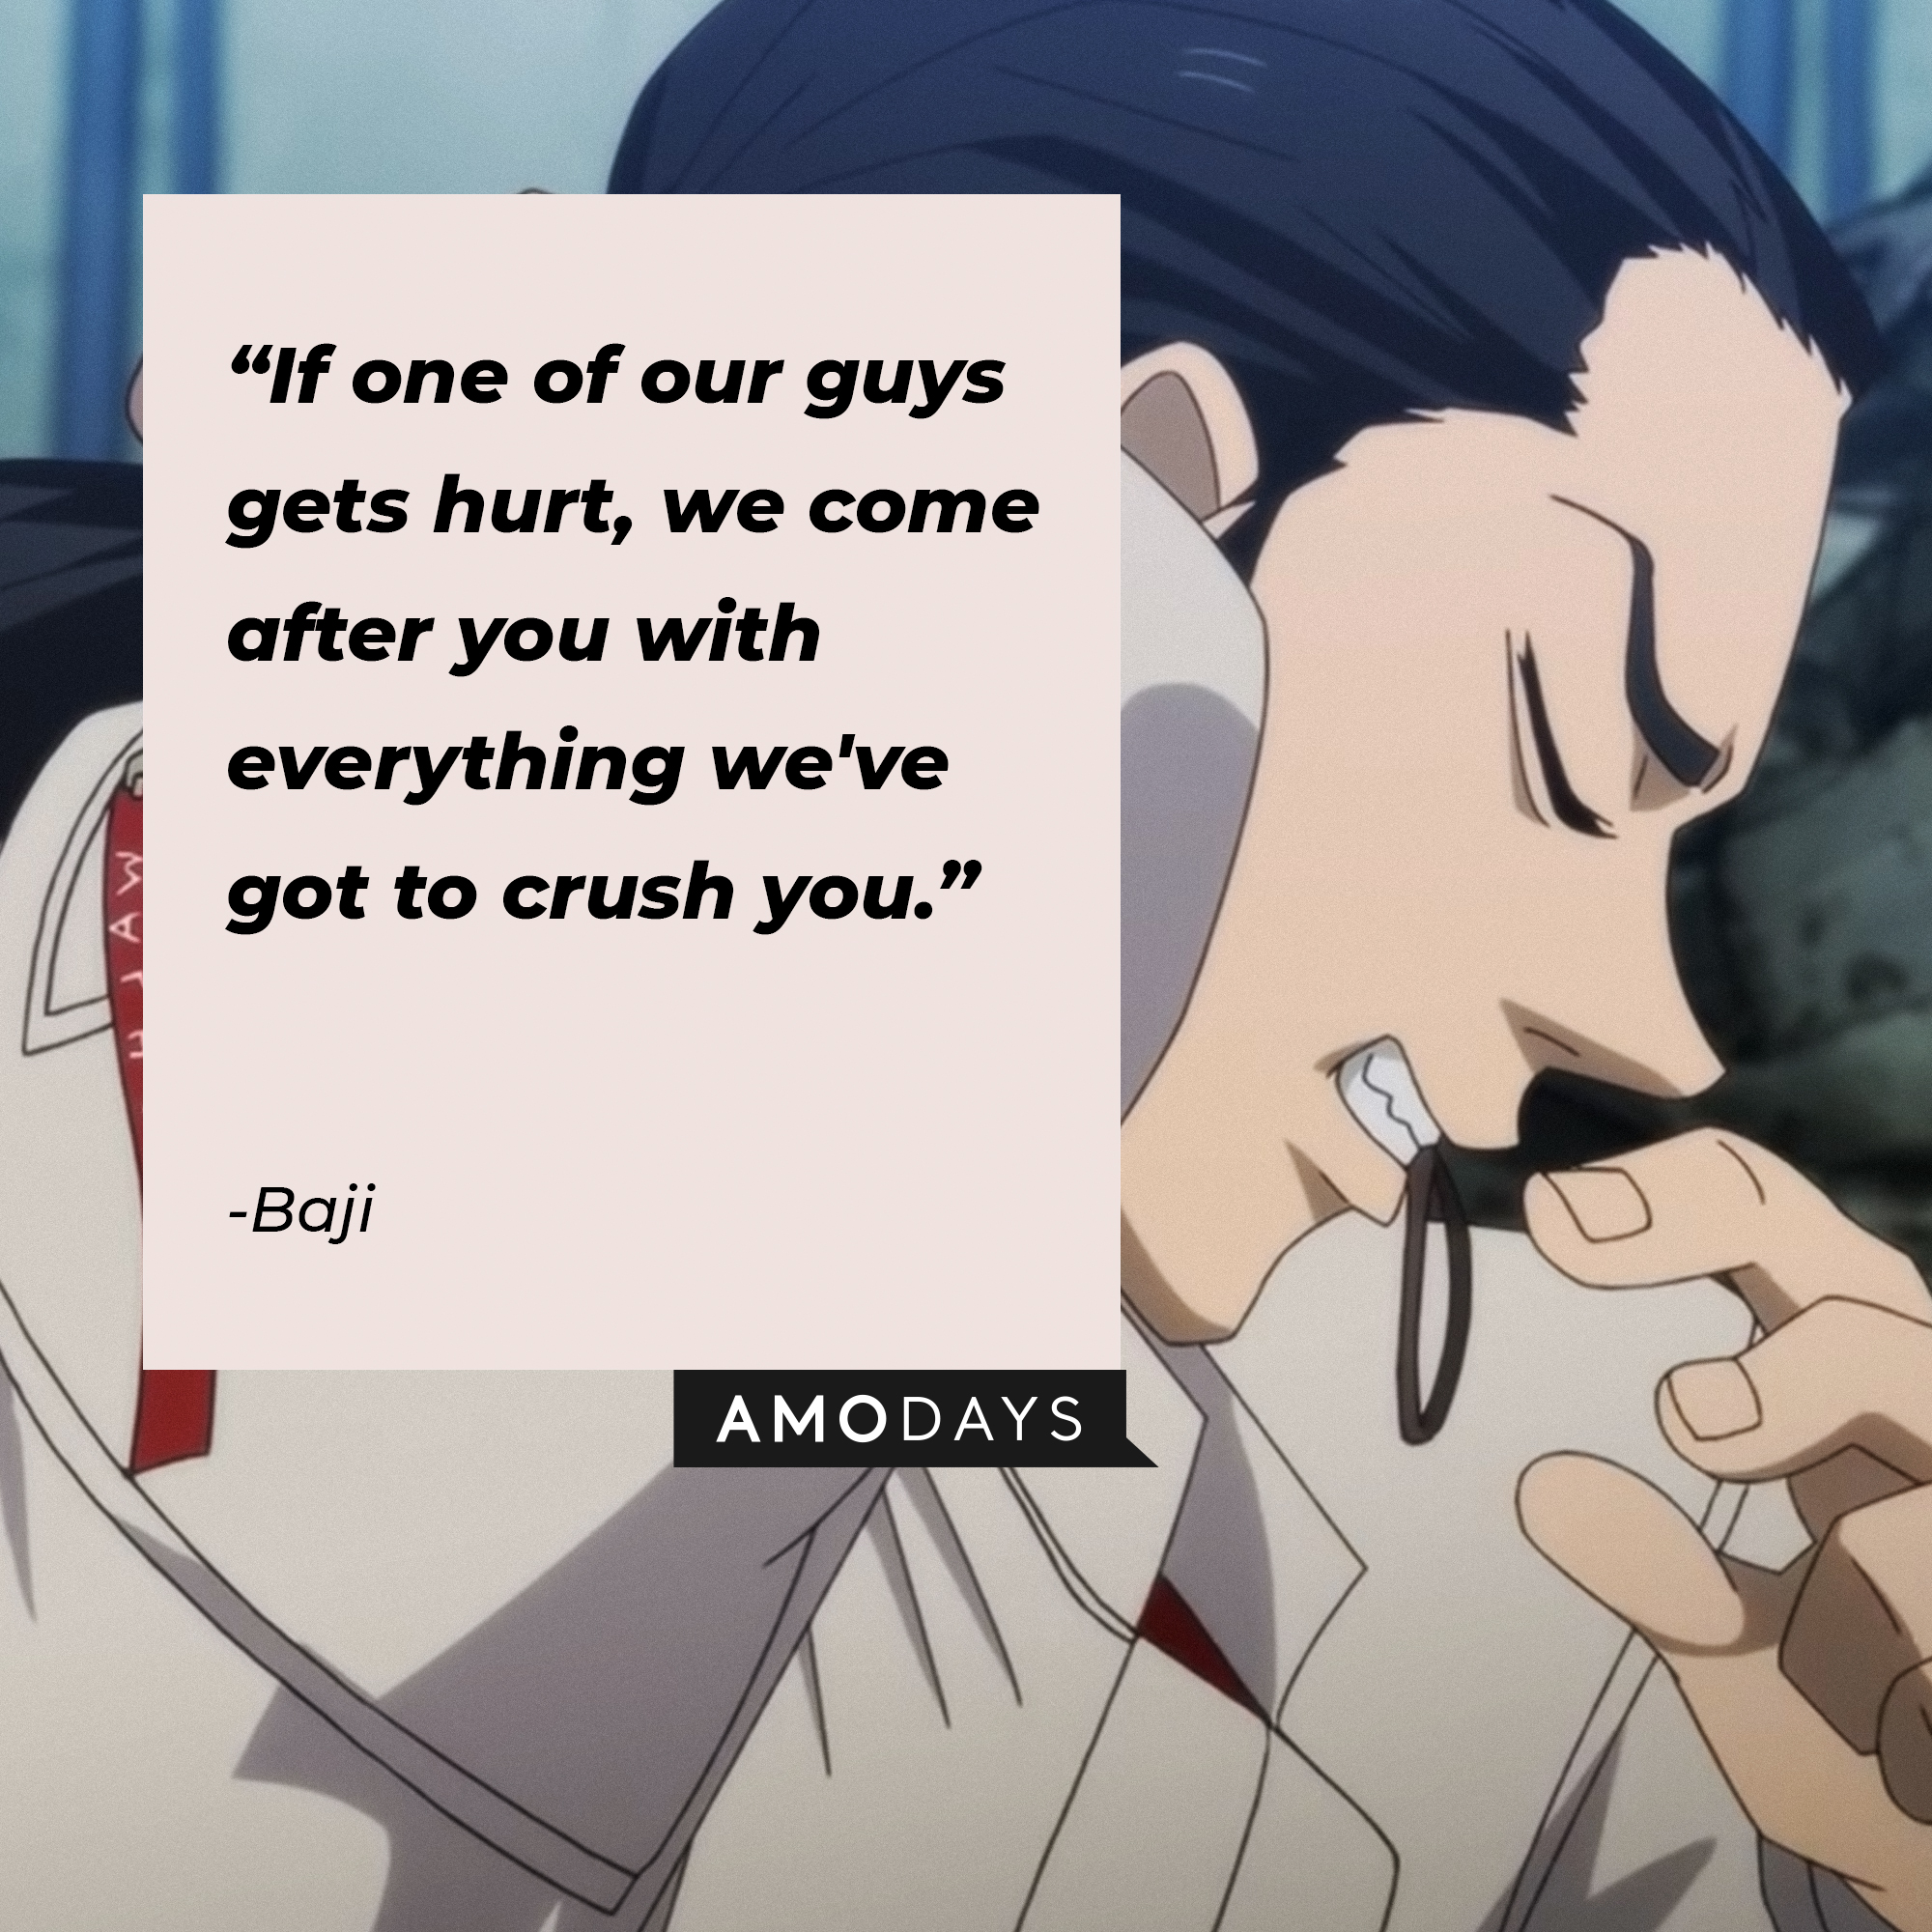 Baji's quote: "If one of our guys gets hurt, we come after you with everything we've got to crush you." | Source: Youtube.com/Crunchyroll Collection